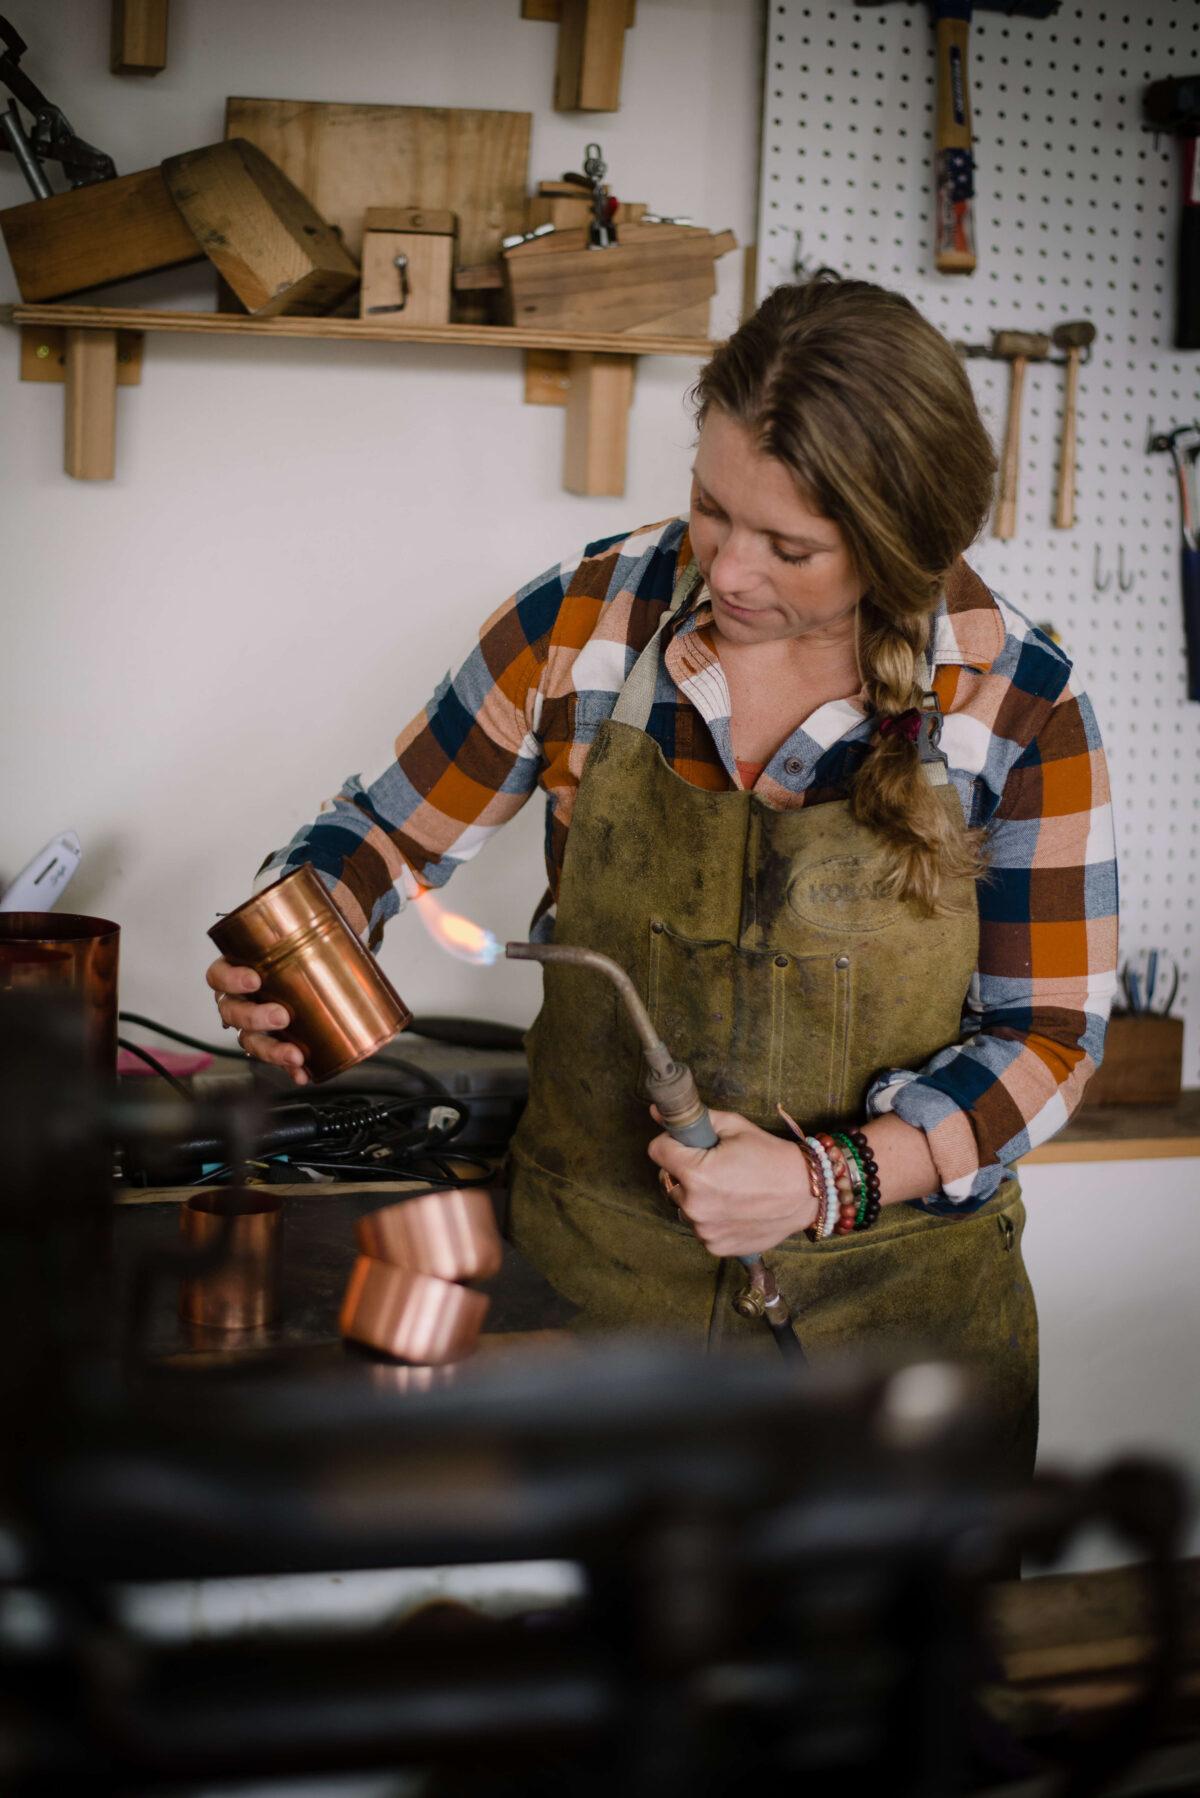 Dahmen sands, grinds, drills, rivets, hand-tins, buffs, and hand-polishes each piece at her home workshop in Wisconsin. (Courtesy of Sara Dahmen)